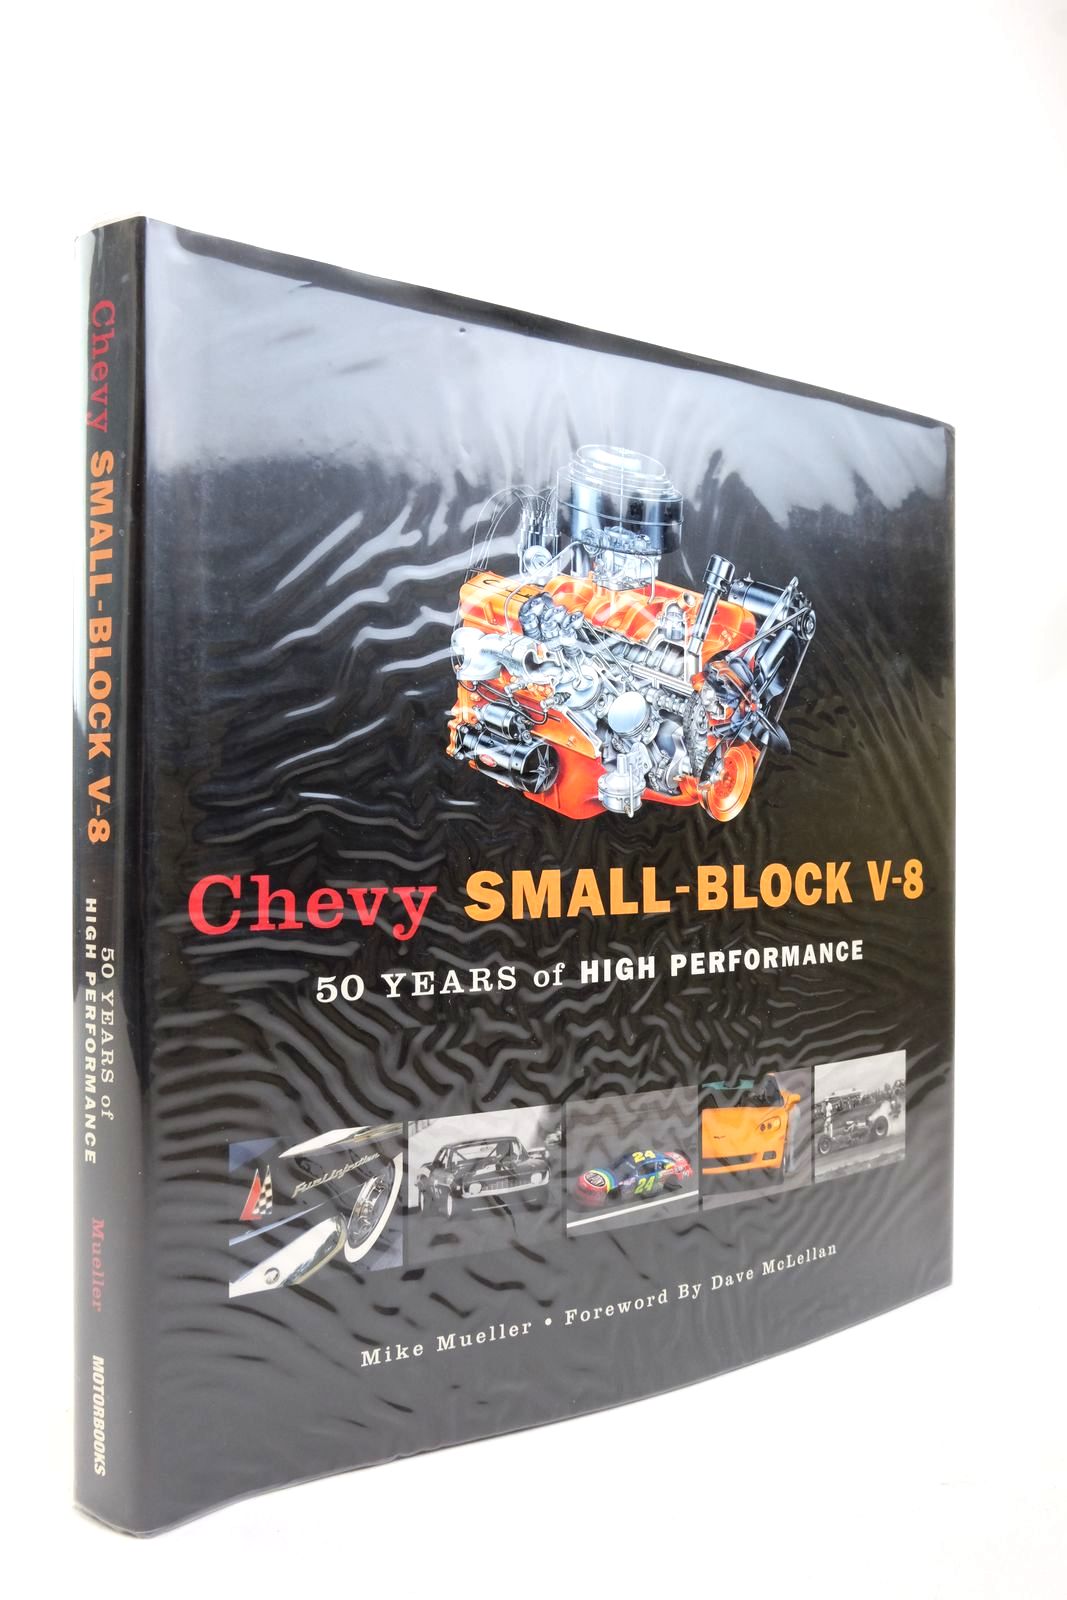 Photo of CHEVY SMALL-BLOCK V-8: 50 YEARS OF HIGH PERFORMANCE written by Mueller, Mike McLellan, Dave published by Motorbooks (STOCK CODE: 2138743)  for sale by Stella & Rose's Books